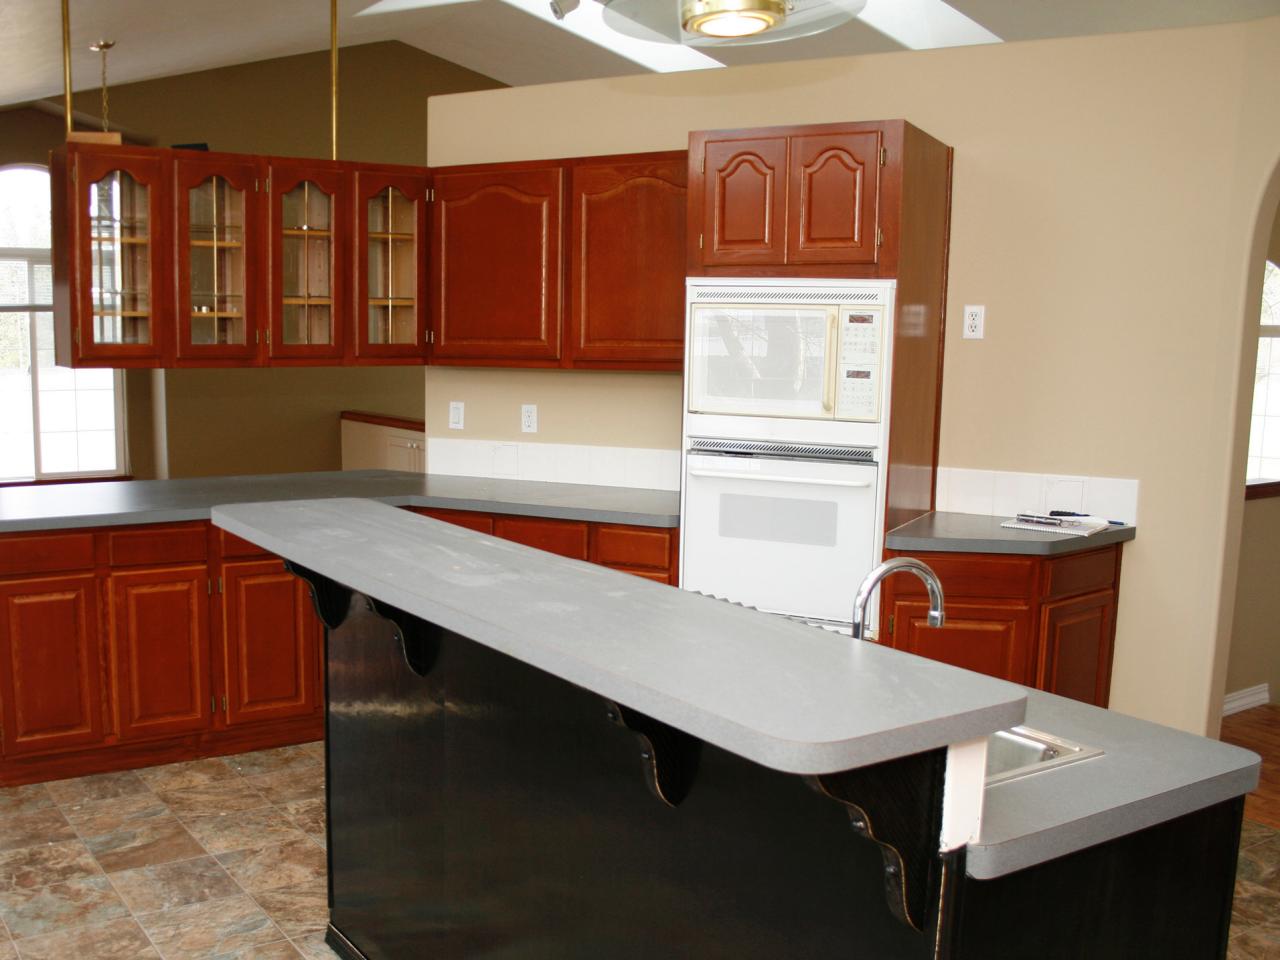 Updating Kitchen Cabinets Pictures Ideas Tips From HGTV HGTV